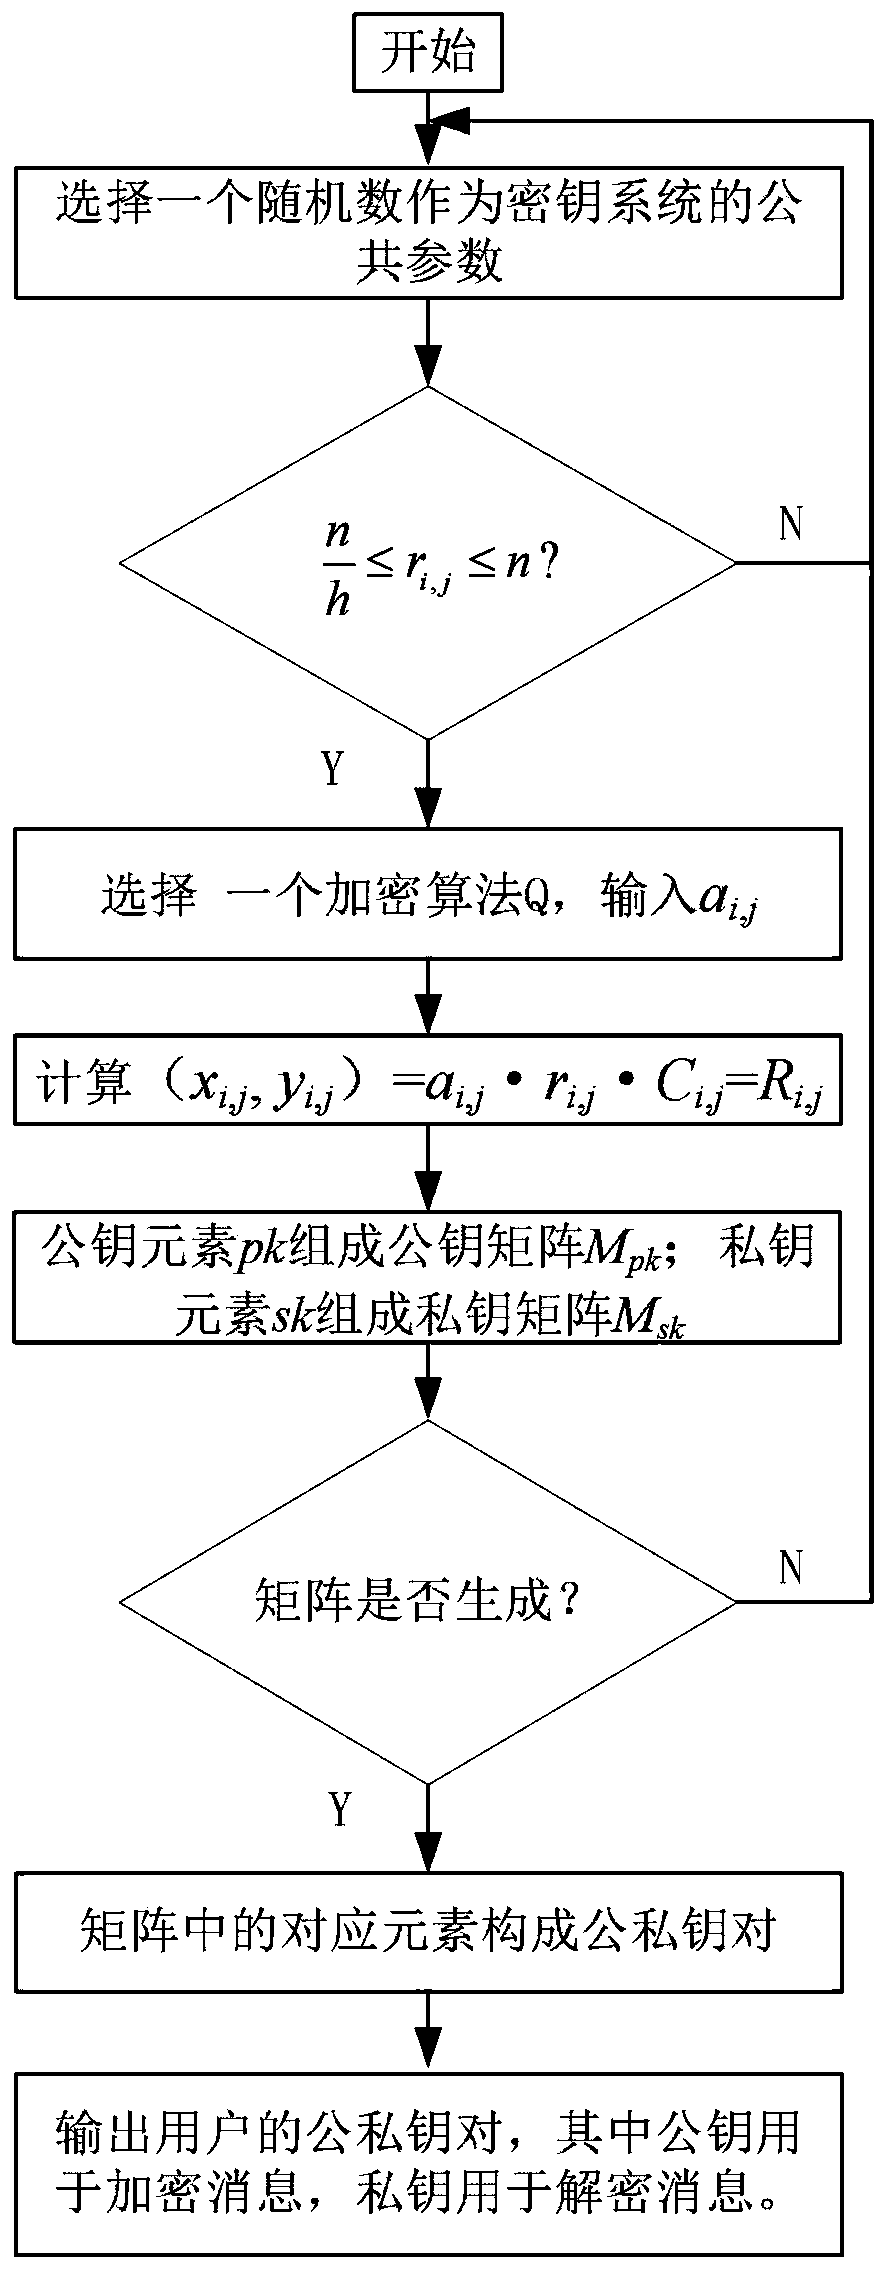 Block chain distributed dynamic network key generation and encryption method